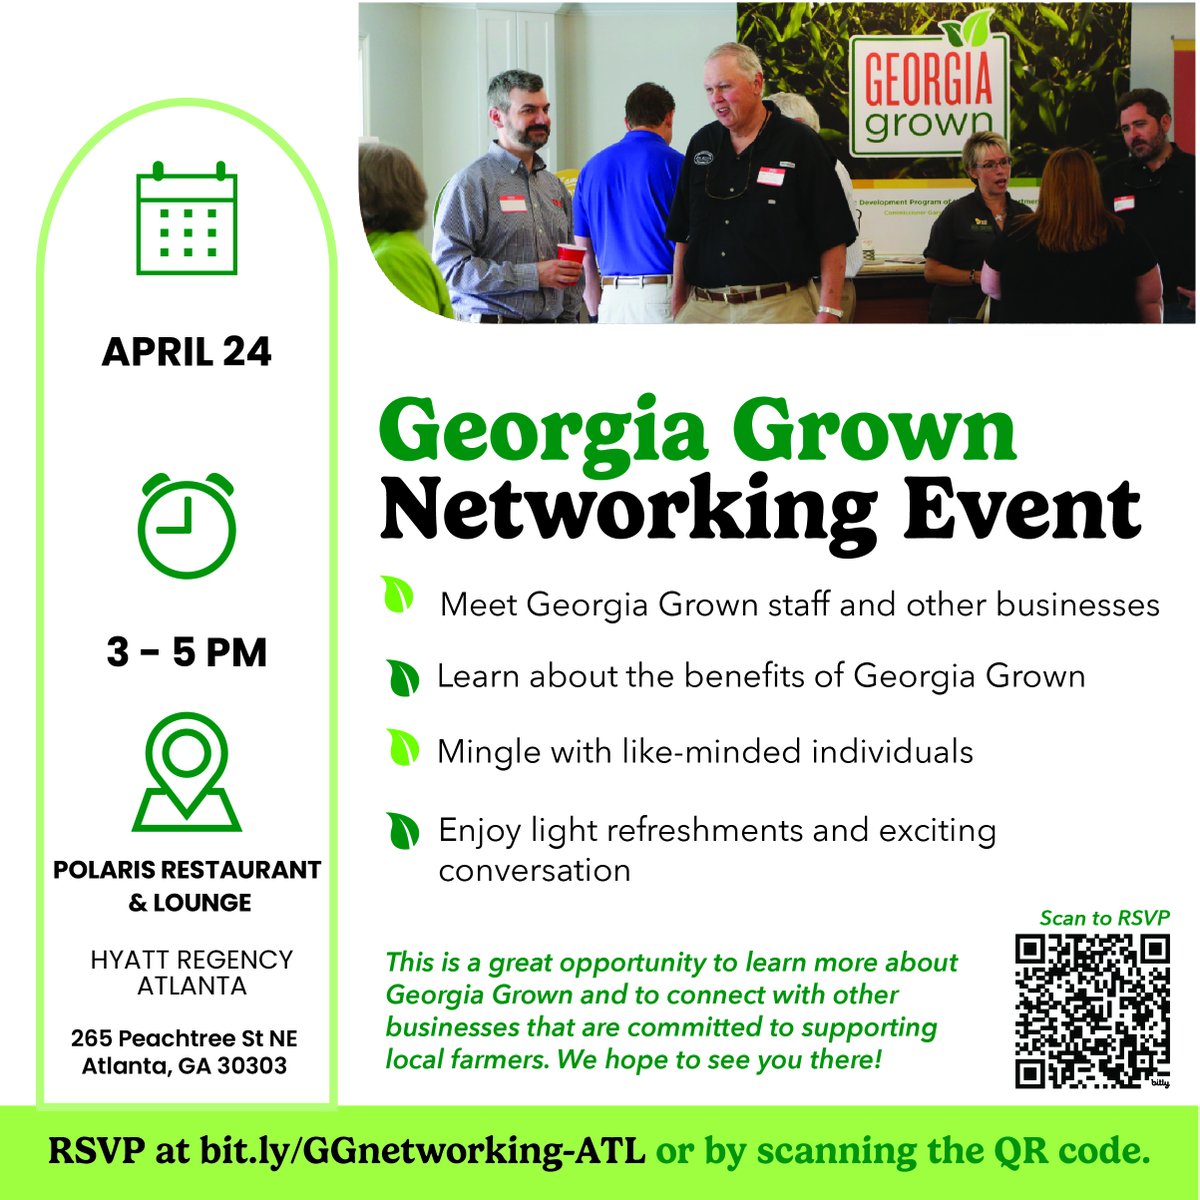 We hope you’ll join us at the next #GeorgiaGrown Networking Event on April 24, 3-5 PM at the Polaris Restaurant in the Hyatt Regency Atlanta! Connect with our Georgia Grown team, local businesses, and farmers. All are welcome! 

Register by April 17 ➡️ bit.ly/GGnetworking-A…